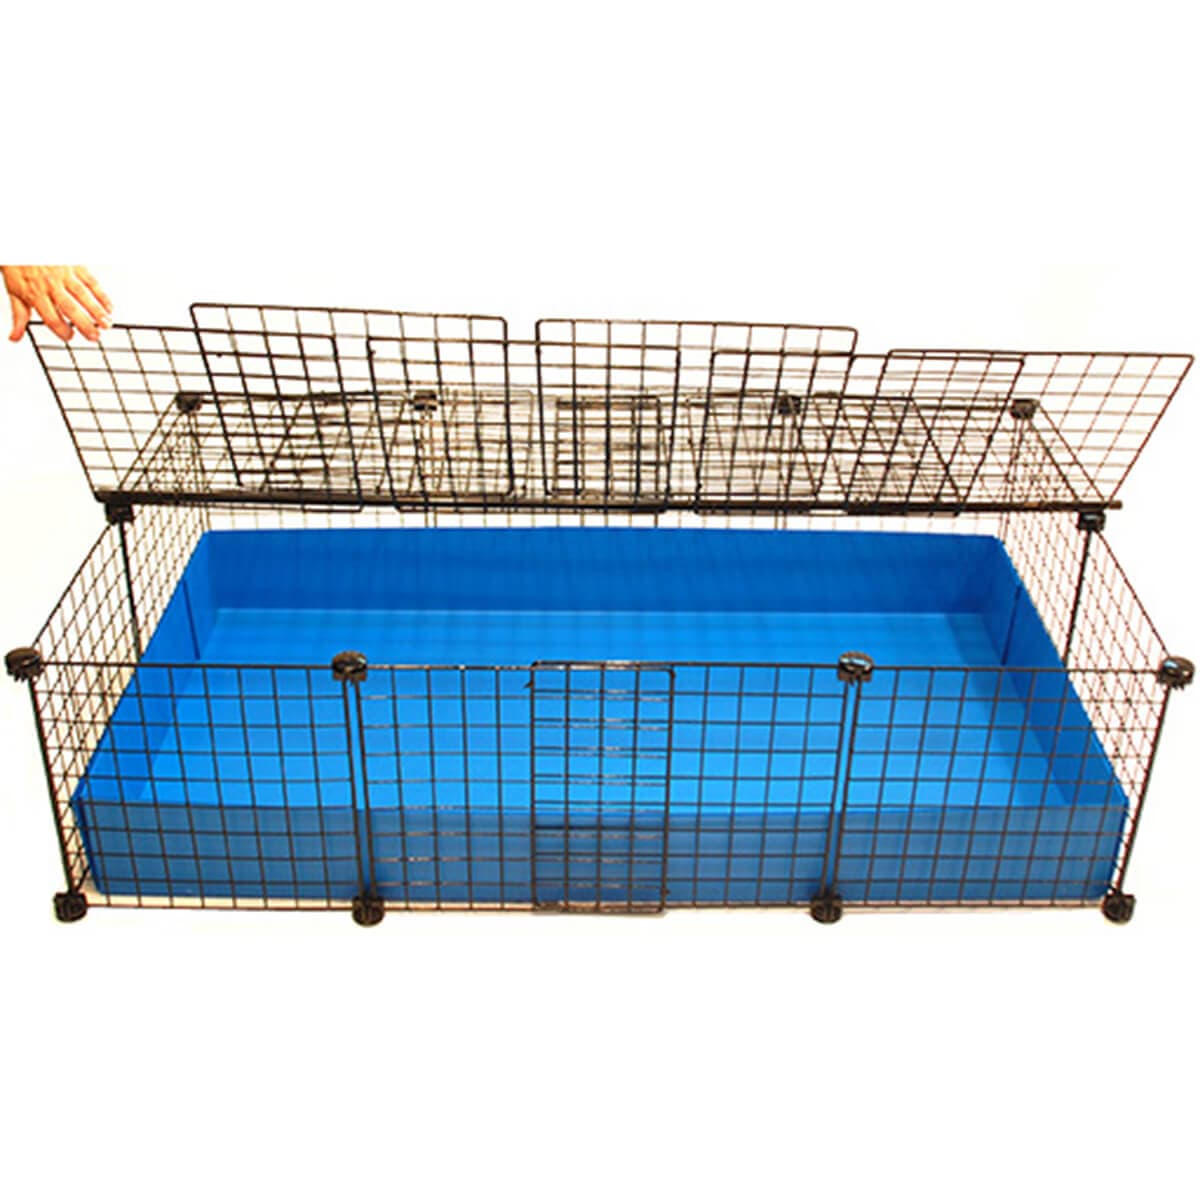 Medium Light blue C&C guinea pig cage and cover with black grids and connectors being opened